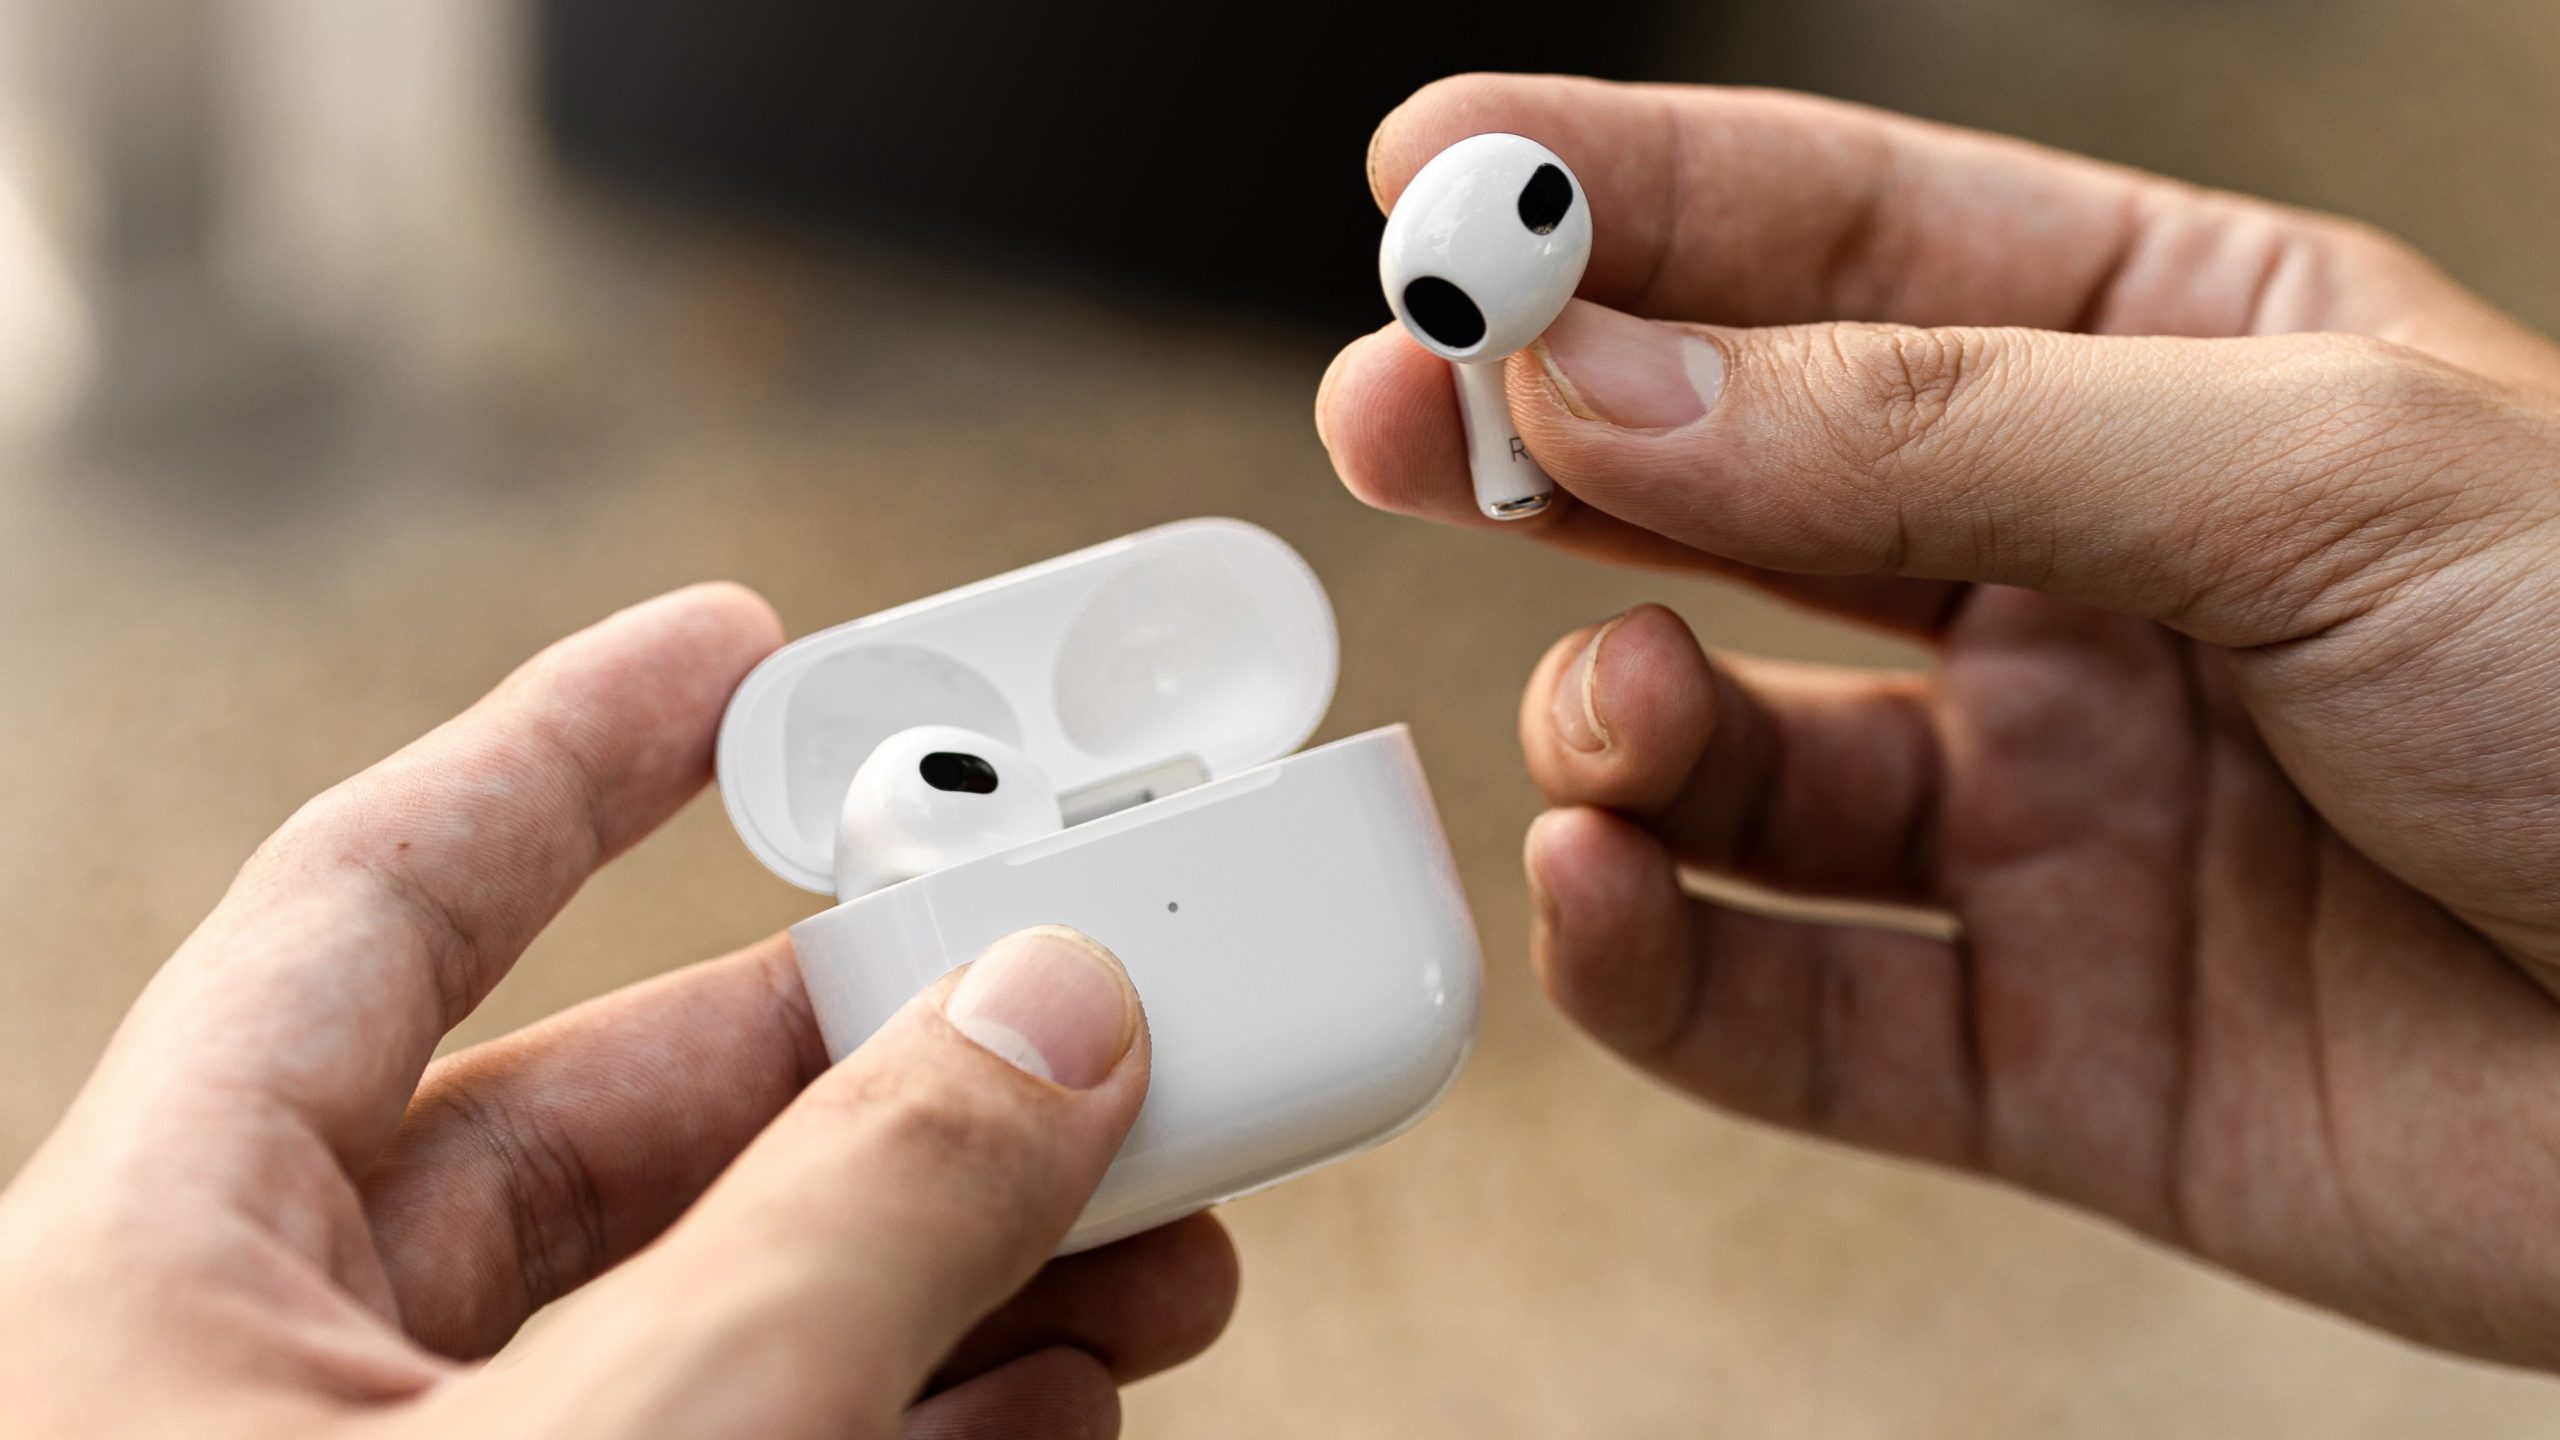 How to change airpods ownership